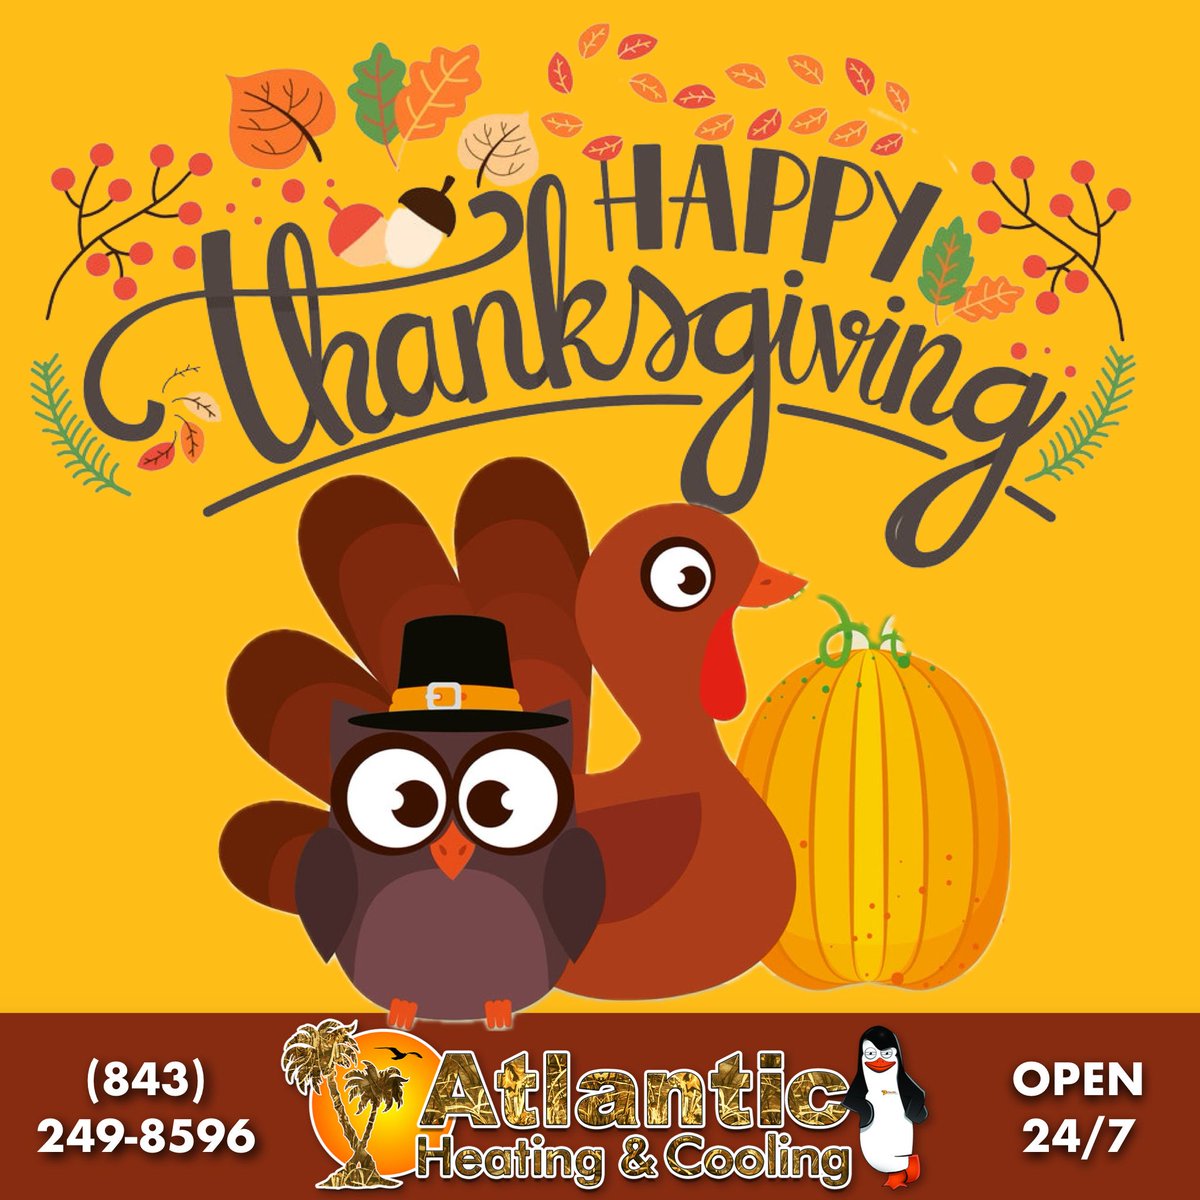 From all of us at Atlantic Heating & Cooling, we wish you a Blessed and Happy Thanksgiving!💛
🍁
atlanticheatingandcooling.com
🍁
#HappyThanksgiving #HVAC #MyrtleBeach #NorthMyrtleBeach #CalabashNC #SouthportNC #Shallotte #LittleRiverSC #PawleysIsland #MurrellsInlet